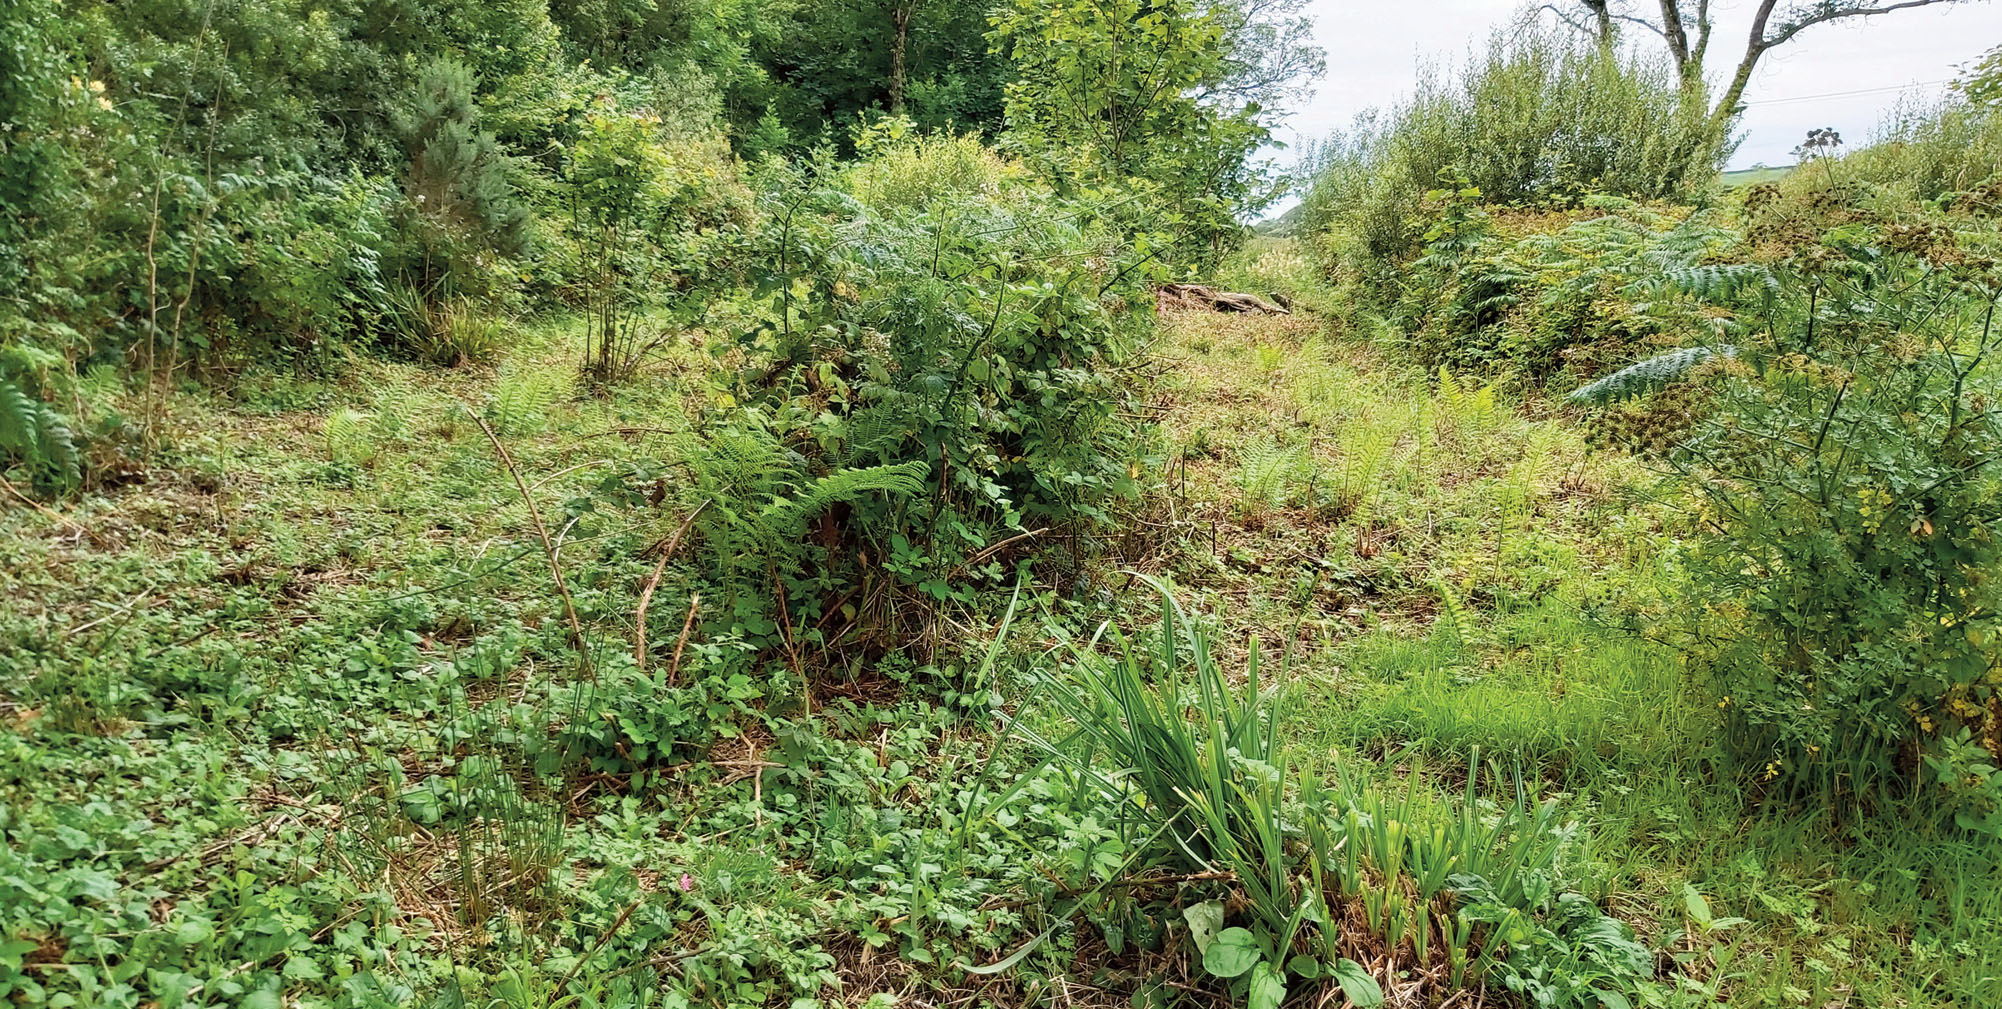 IMage from Castelmartin Corse catchment showing areas cut to create a Himalayan Balsam break to create a buffer from main woodland to a stream to stop spread of invasive species